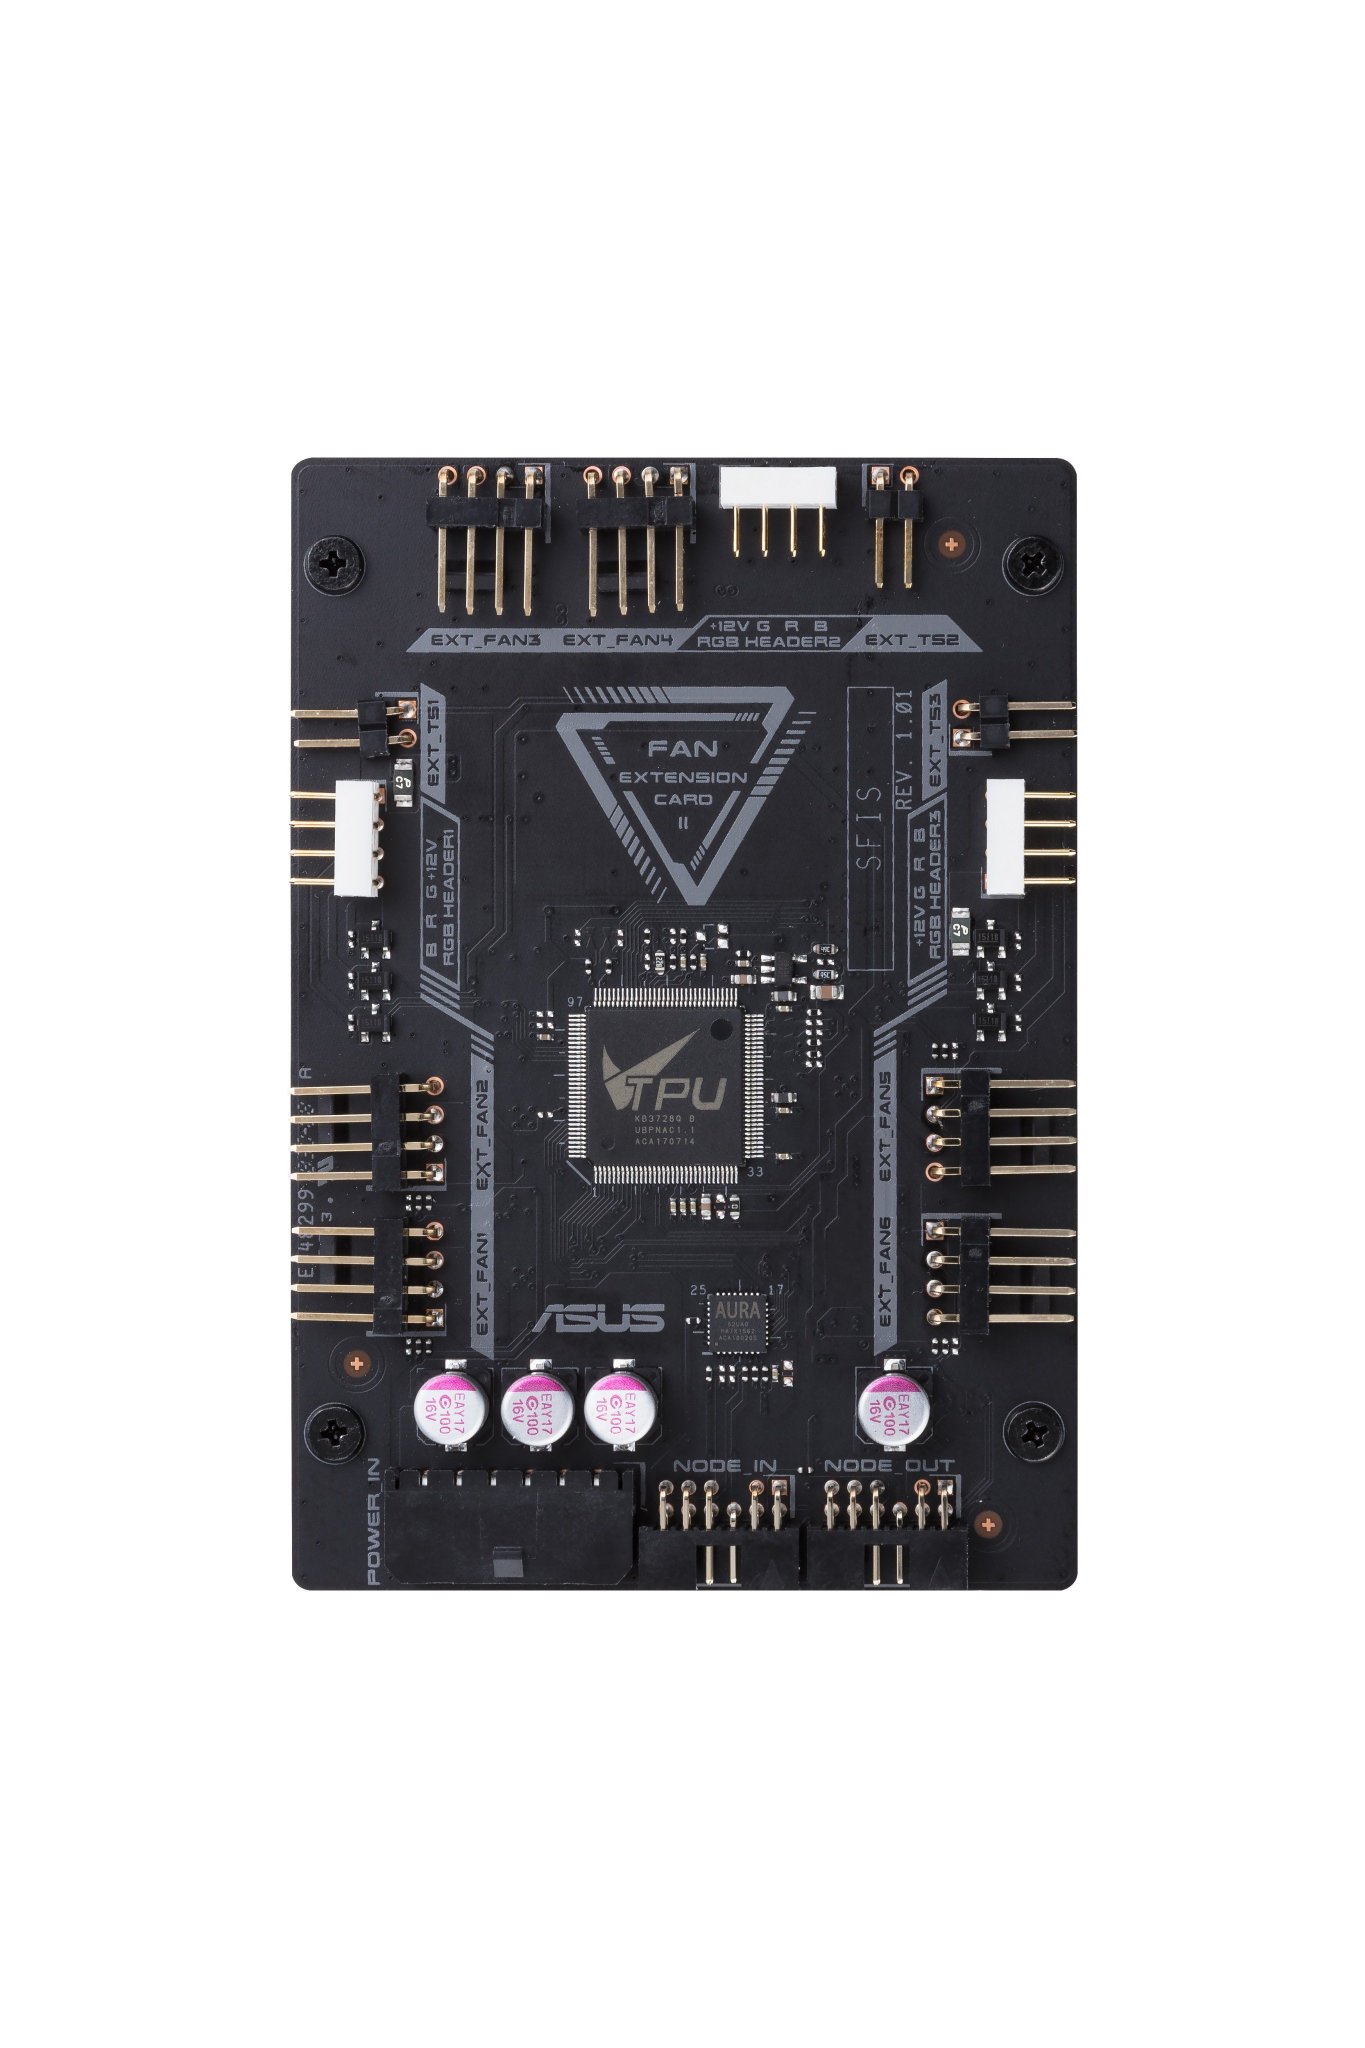 Begå underslæb Array Folde Juan Jose Guerrero on Twitter: "The new ASUS Fan Extension Card takes  connectivity with compatible ASUS motherboards to the next level. Built for  next level builds &amp; those that appreciate ease of